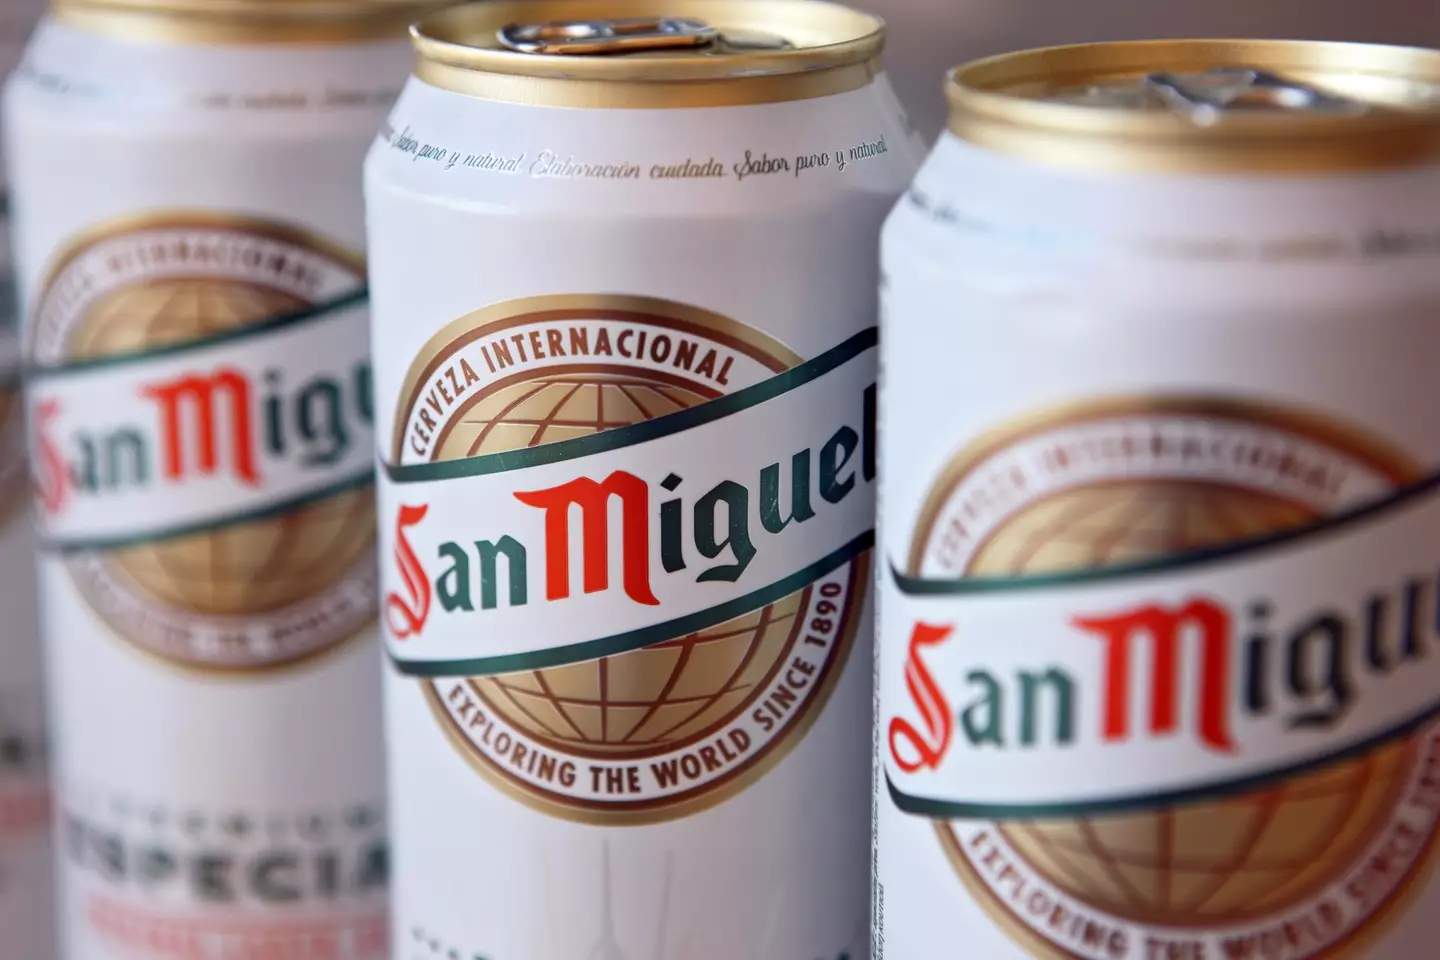 San Miguel is owned by Carlsberg, so they use the same breweries.